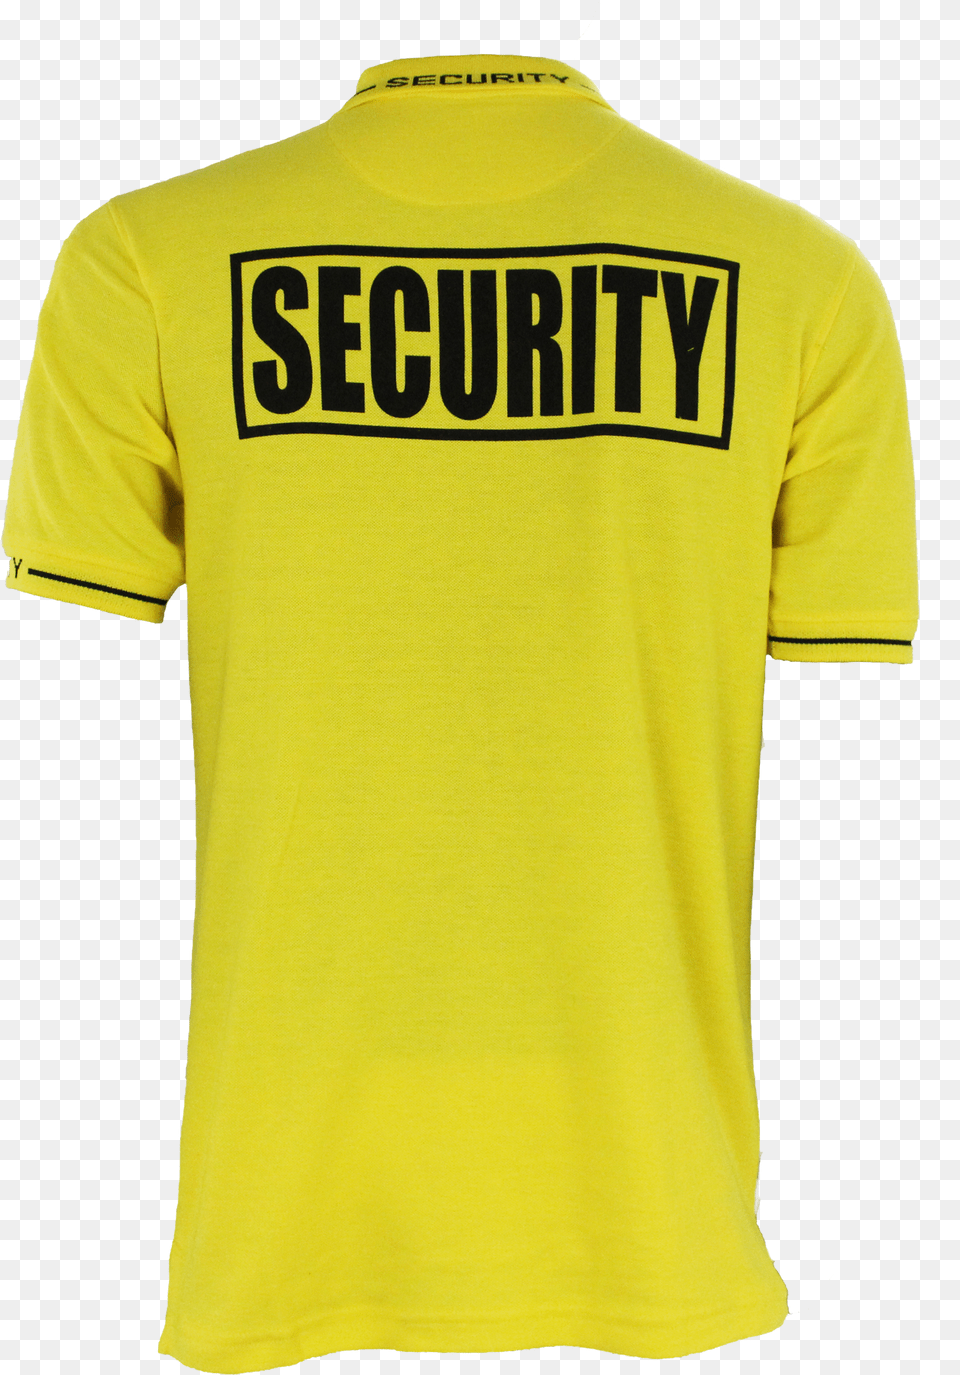 Customize Your Own Garments Yellow Security Polo Shirts, Clothing, Shirt, T-shirt Png Image